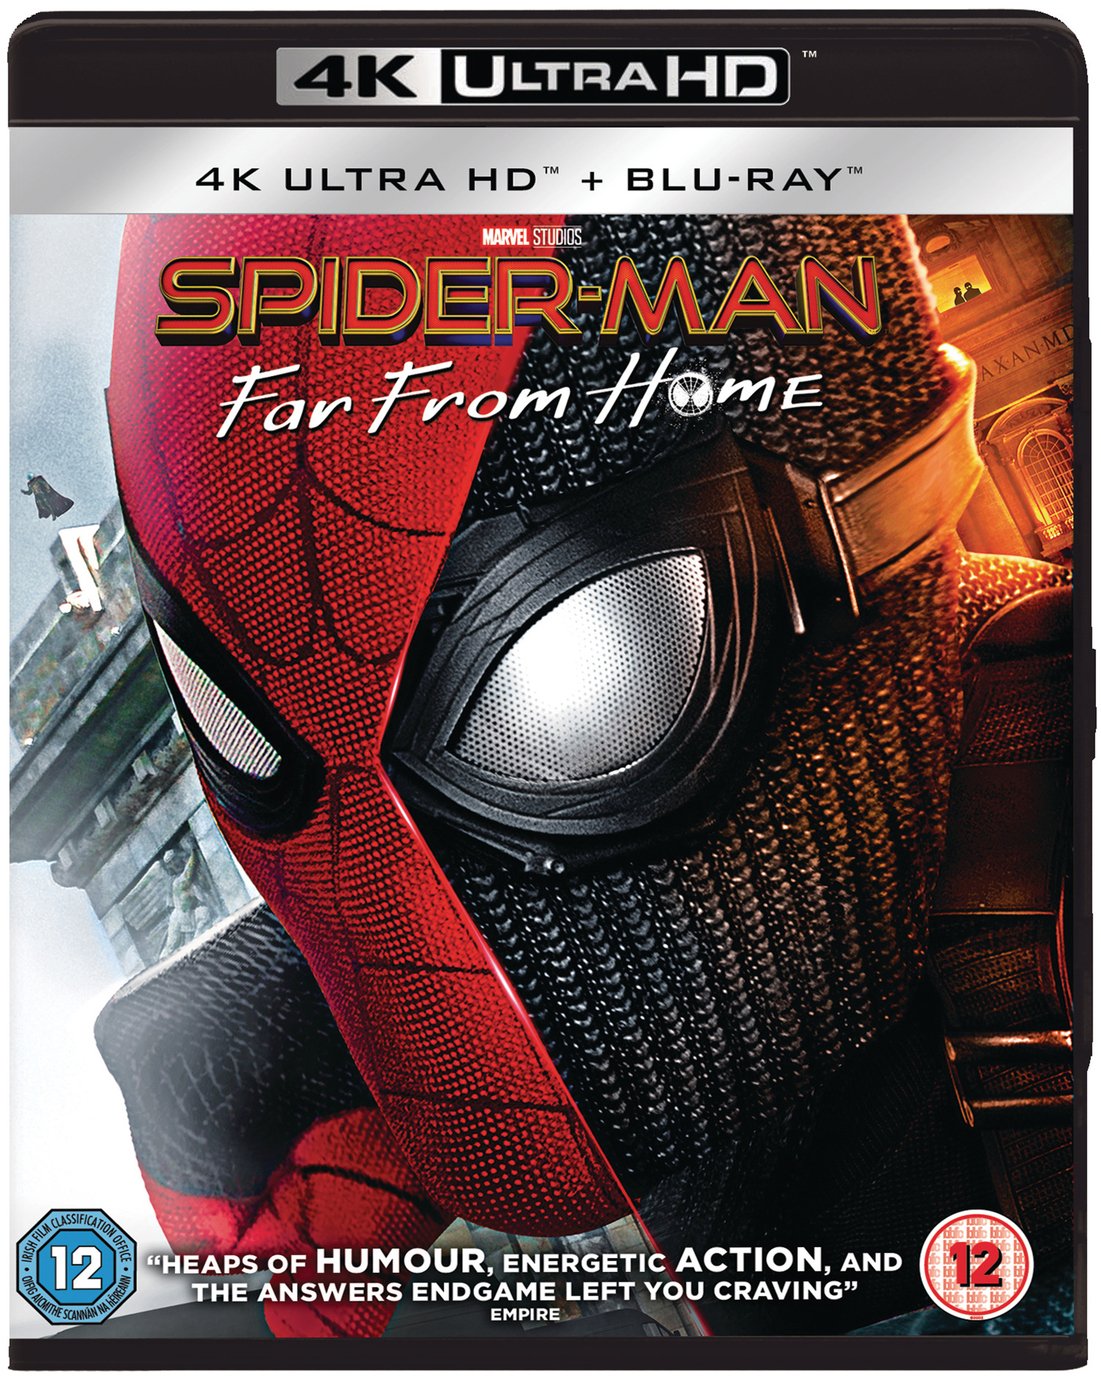 Spider-Man: Far From Home 4K UHD Blu-ray